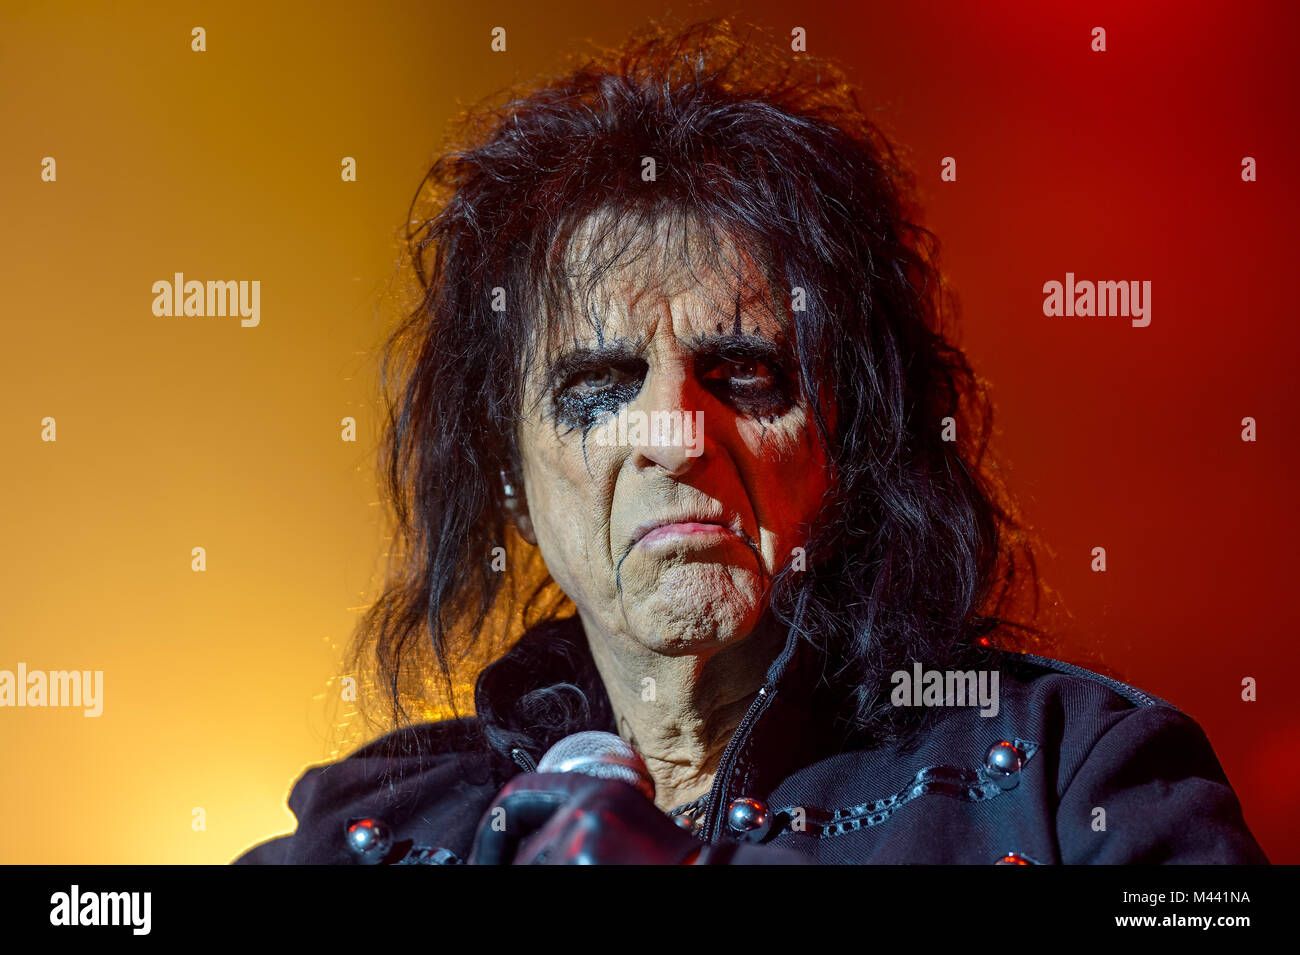 Alice Cooper live in Milan 2017 "A PARANORMAL EVENING WITH ALICE COOPER TOUR" Stock Photo